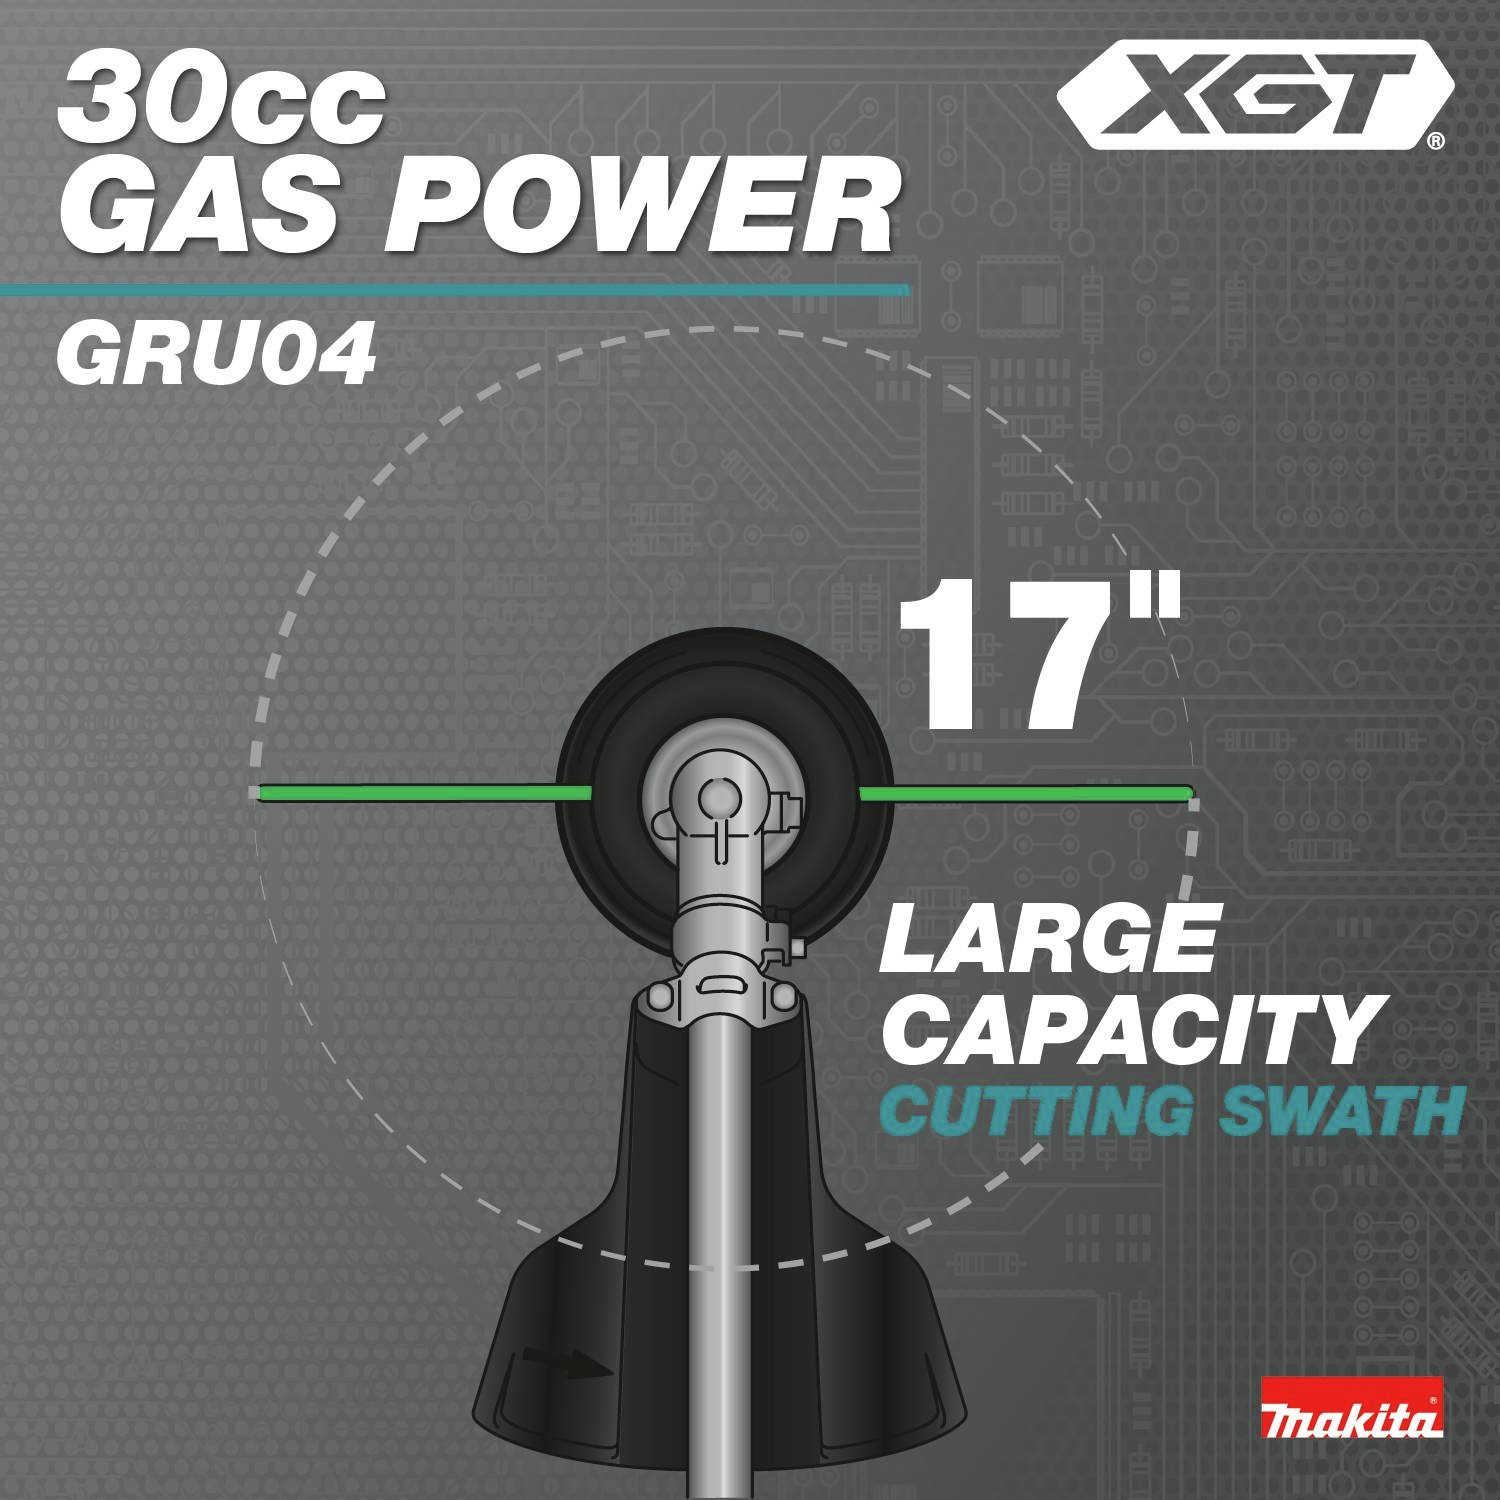 30cc Gas Power: 17 in. large capacity cutting swath